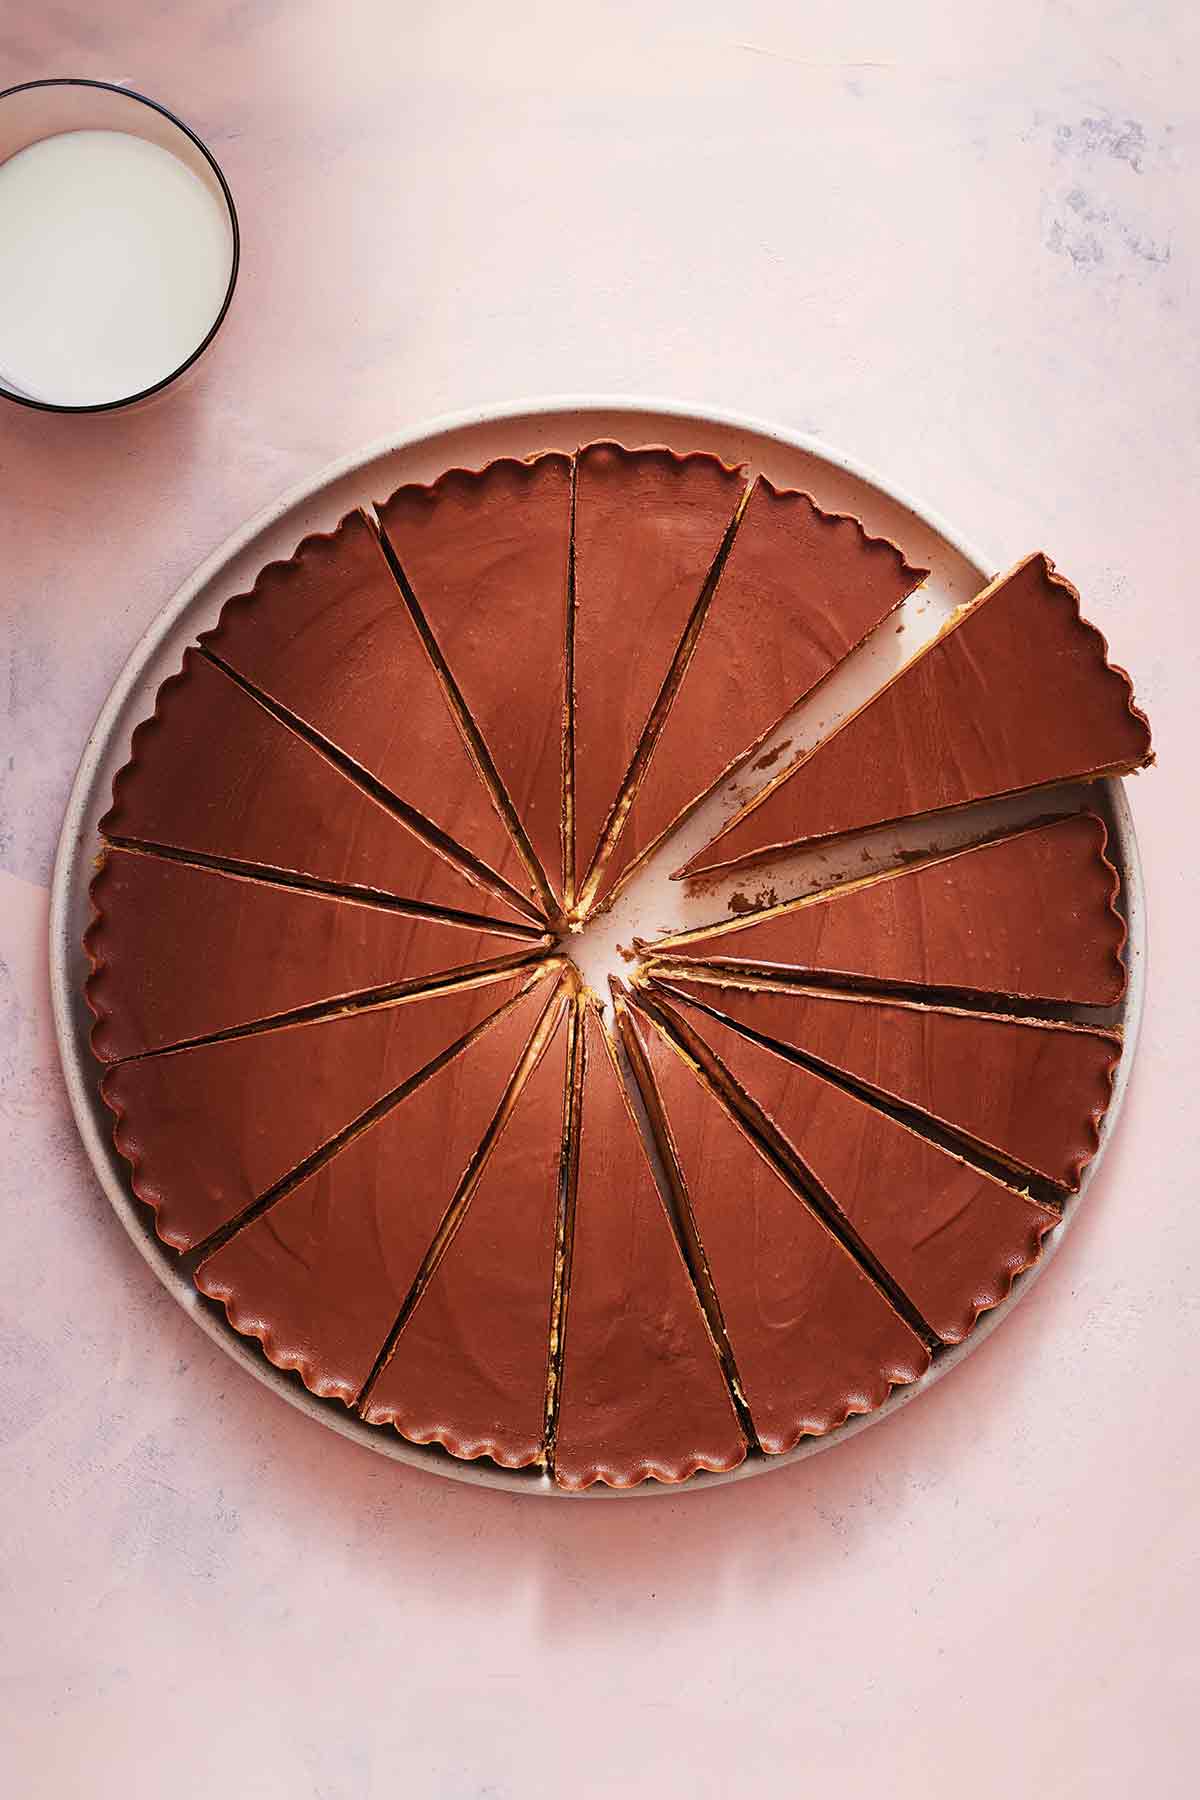 A giant peanut butter cup on a plate, cut into 15 wedges.